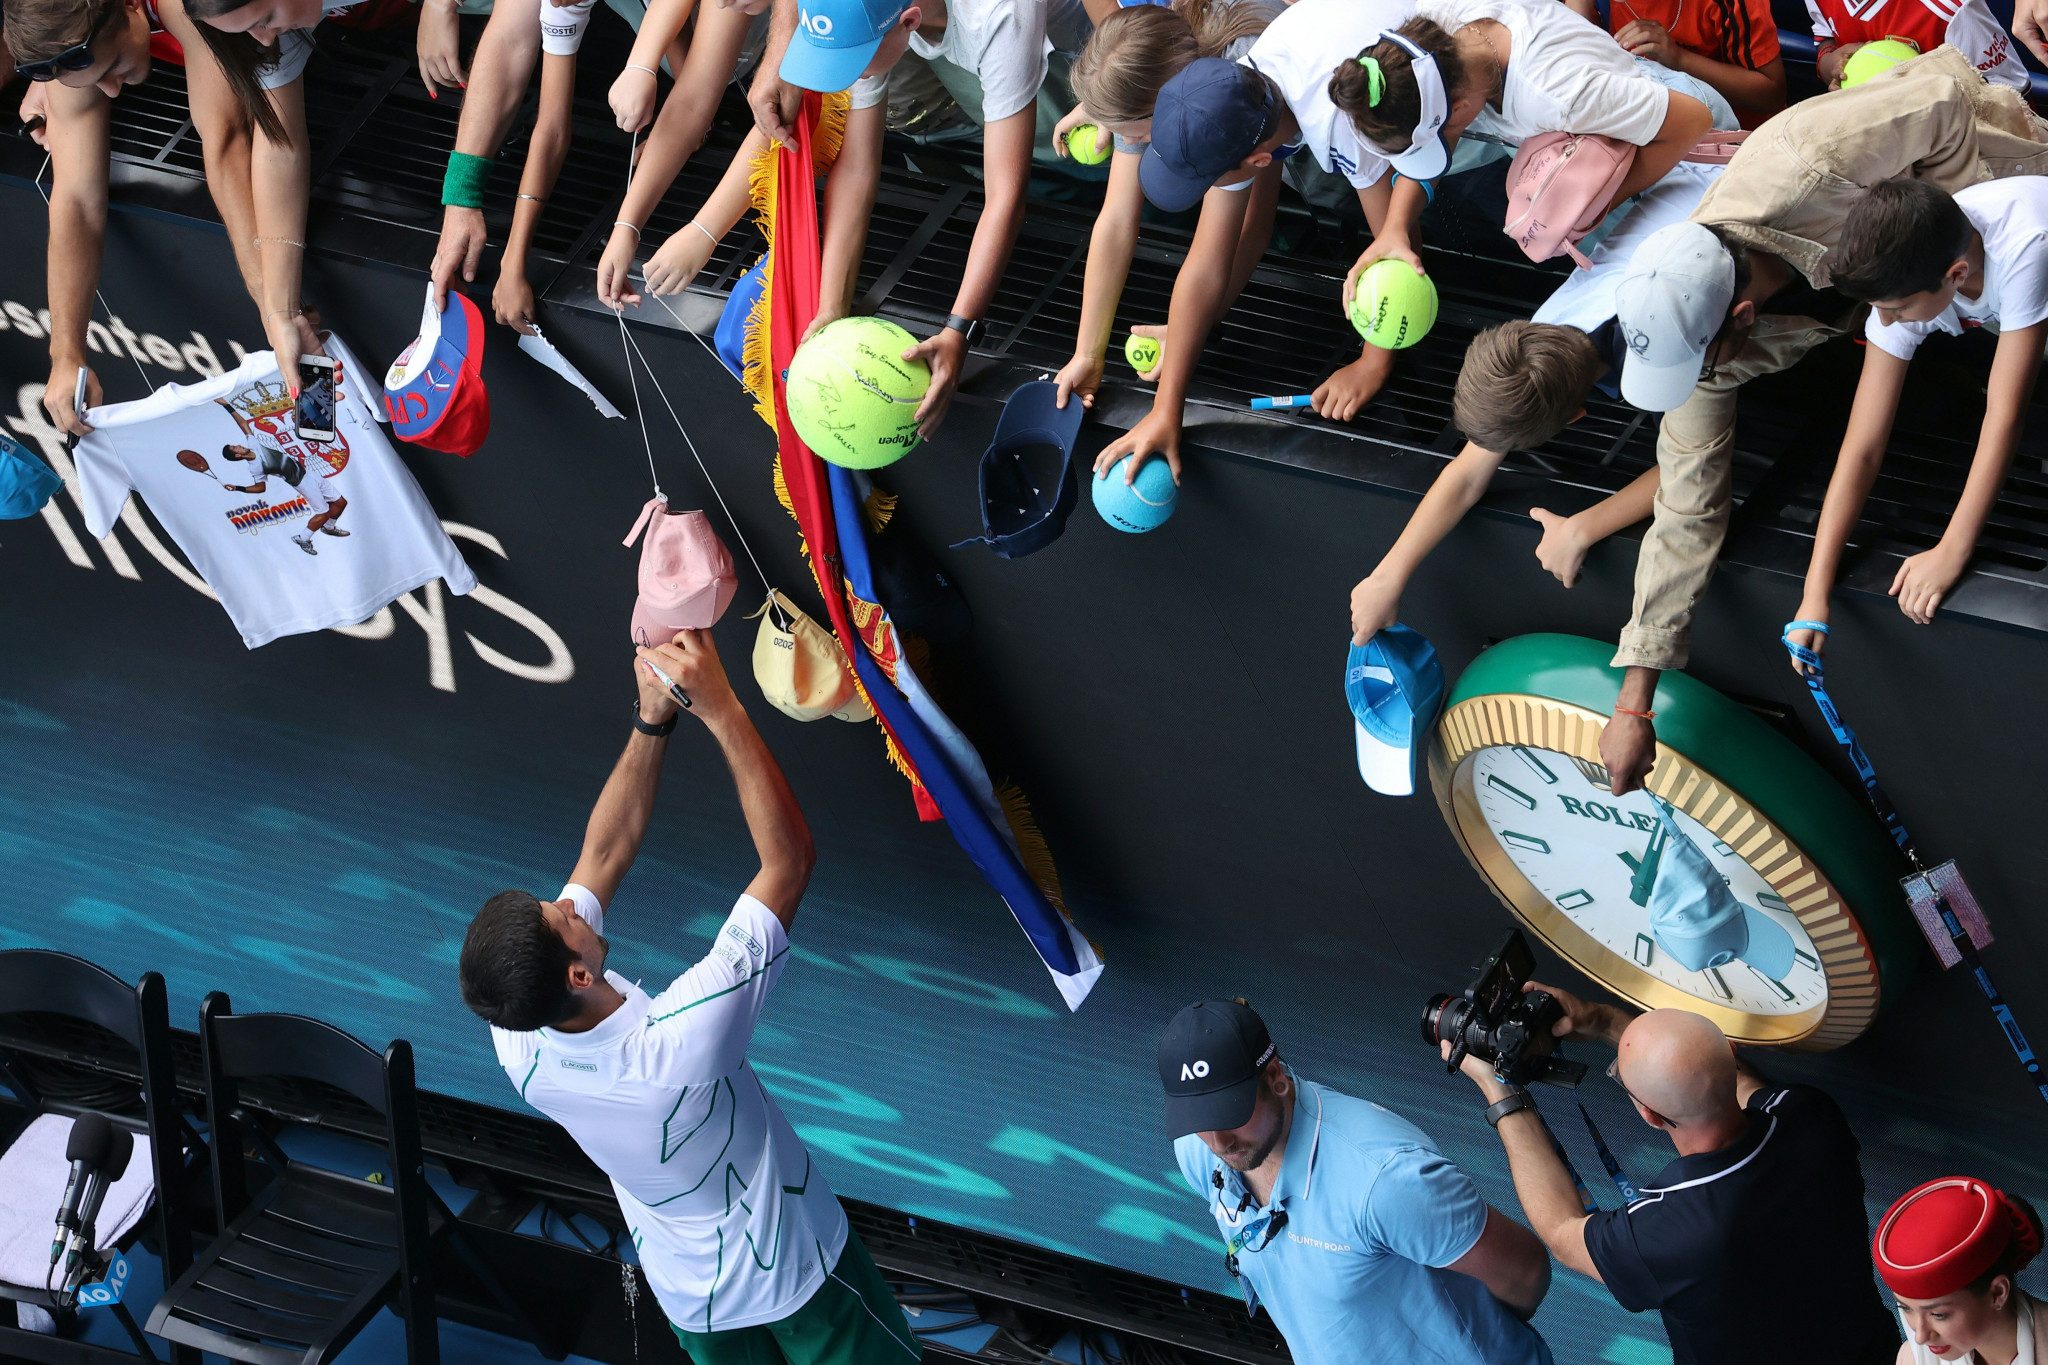 Djokovic signs autographs for fans after his win ©Getty Images